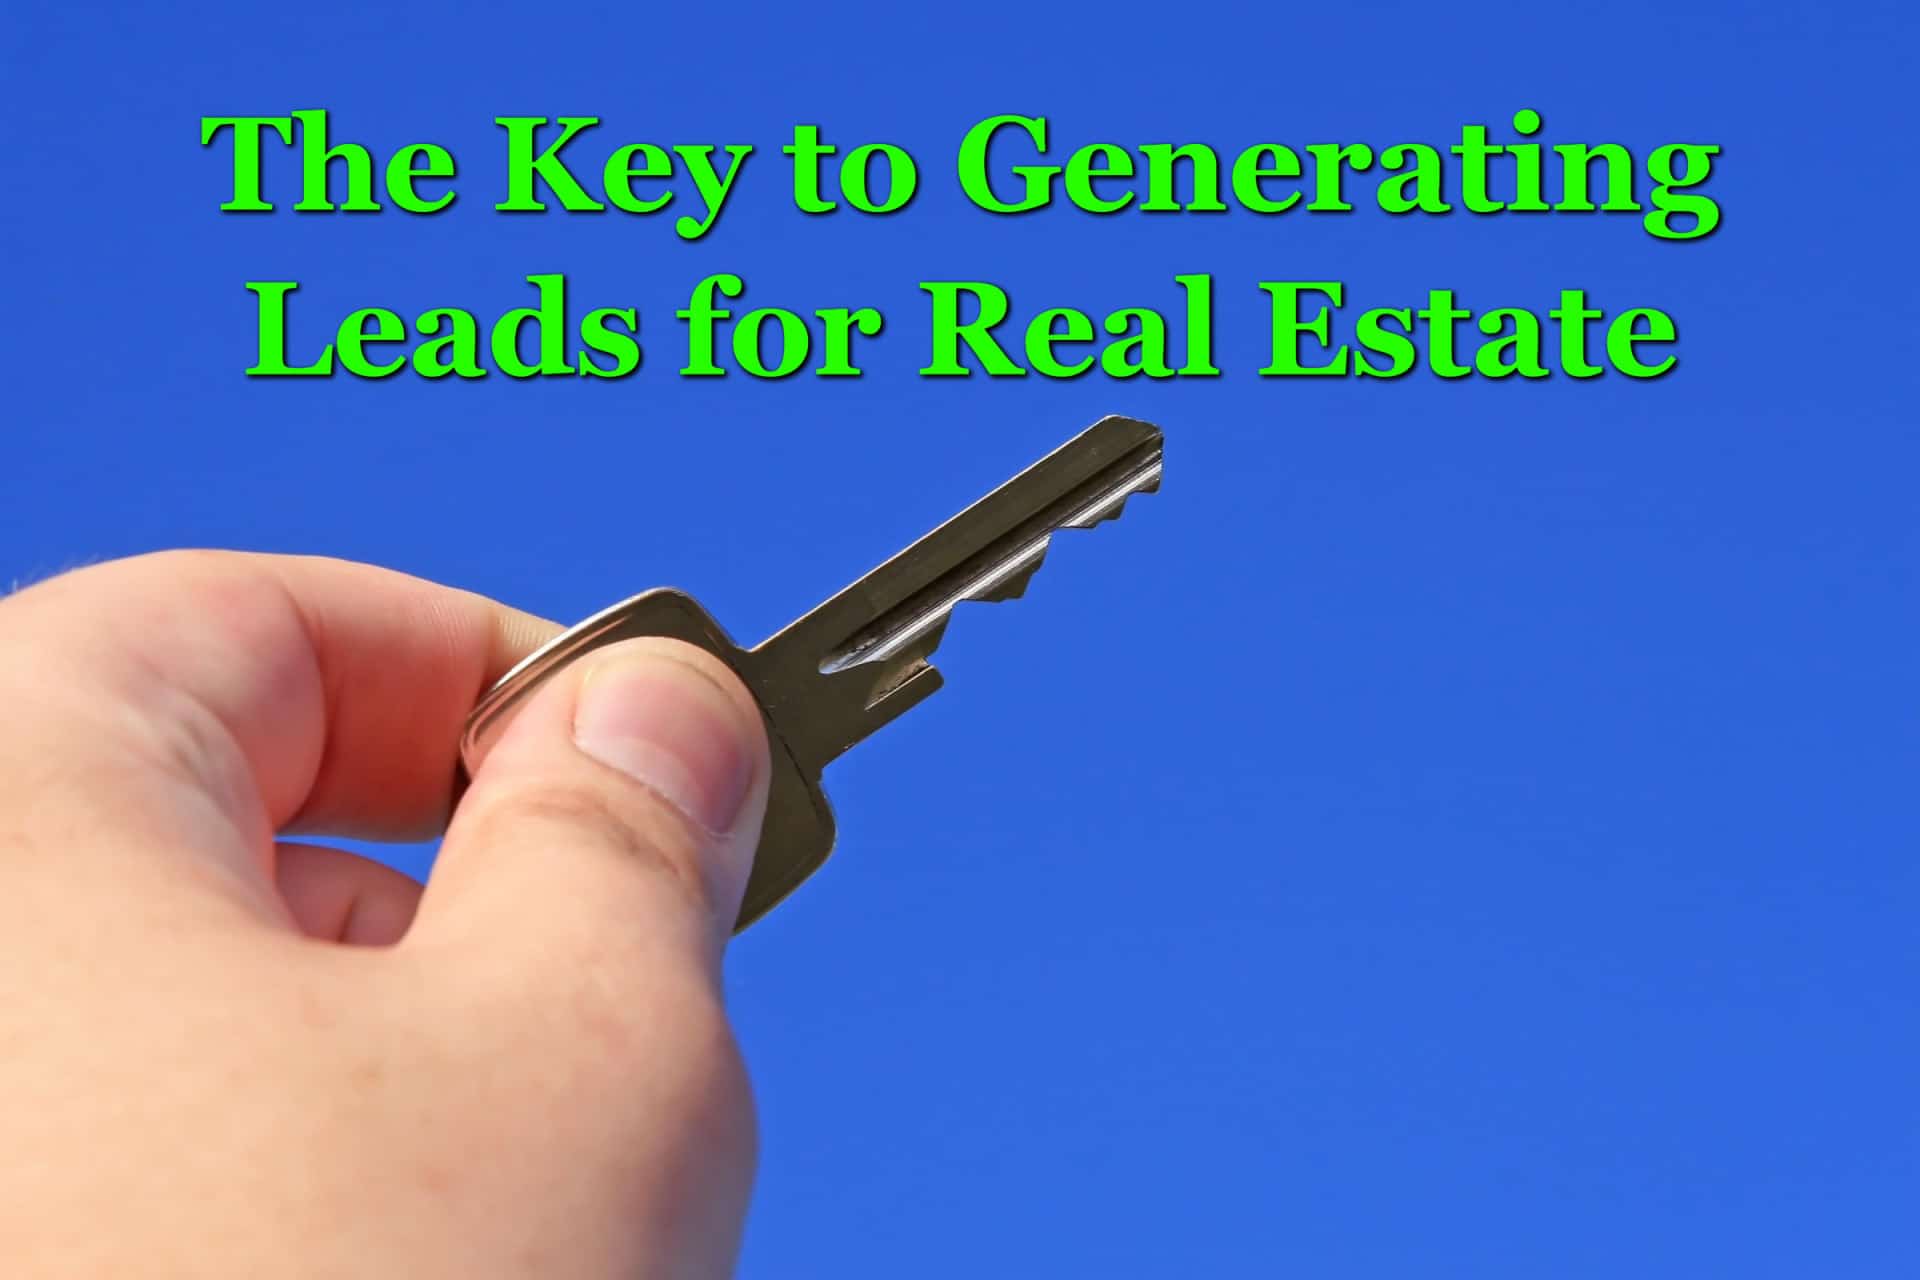 A man holding a key to symbolize the key to generating leads for real estatethe